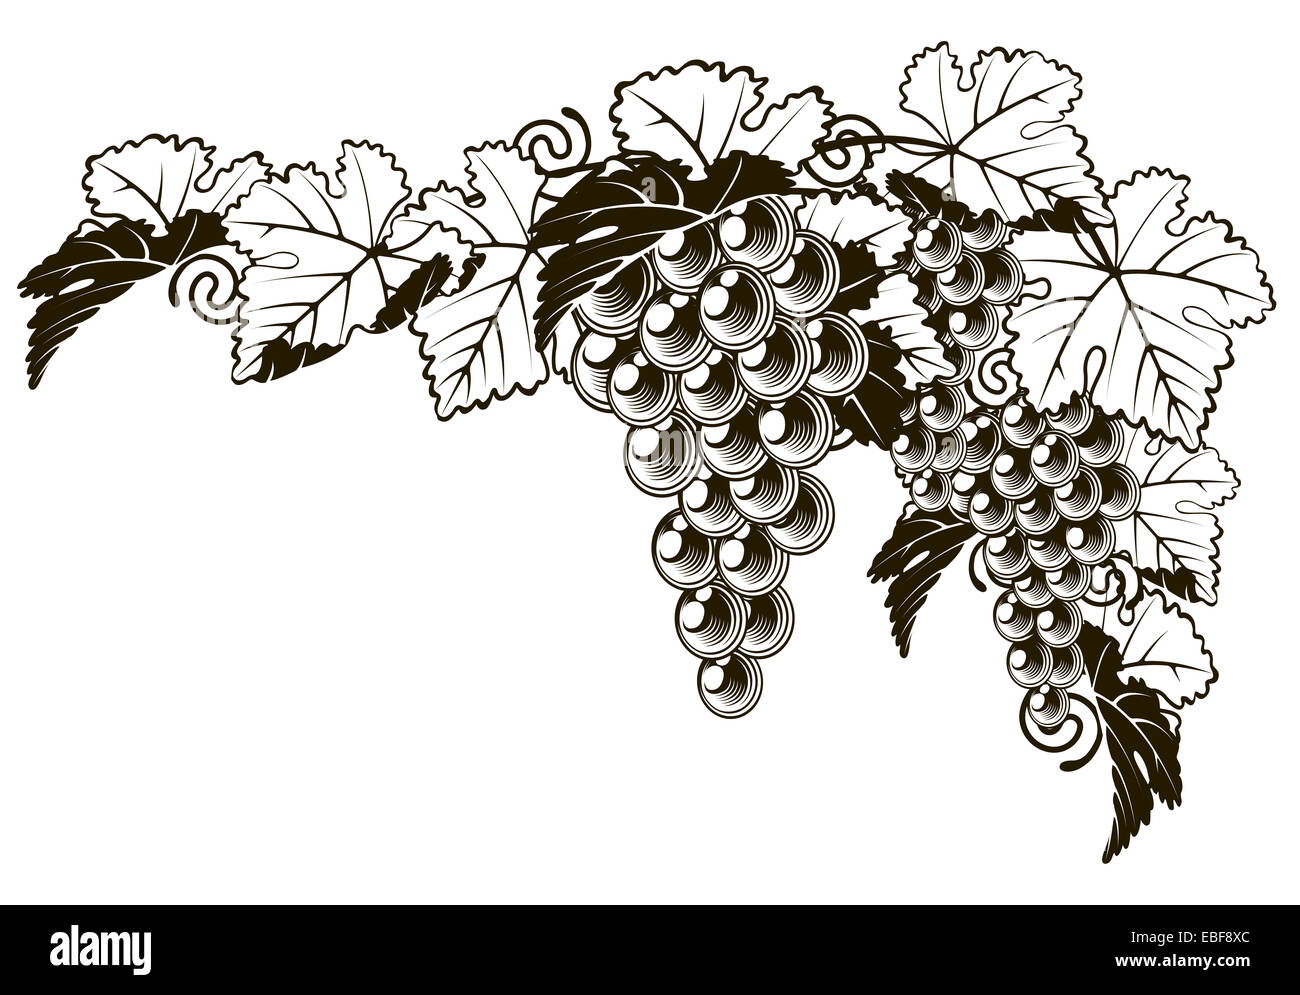 An original illustration of a grapes on a grape vine design element in a vintage style Stock Photo